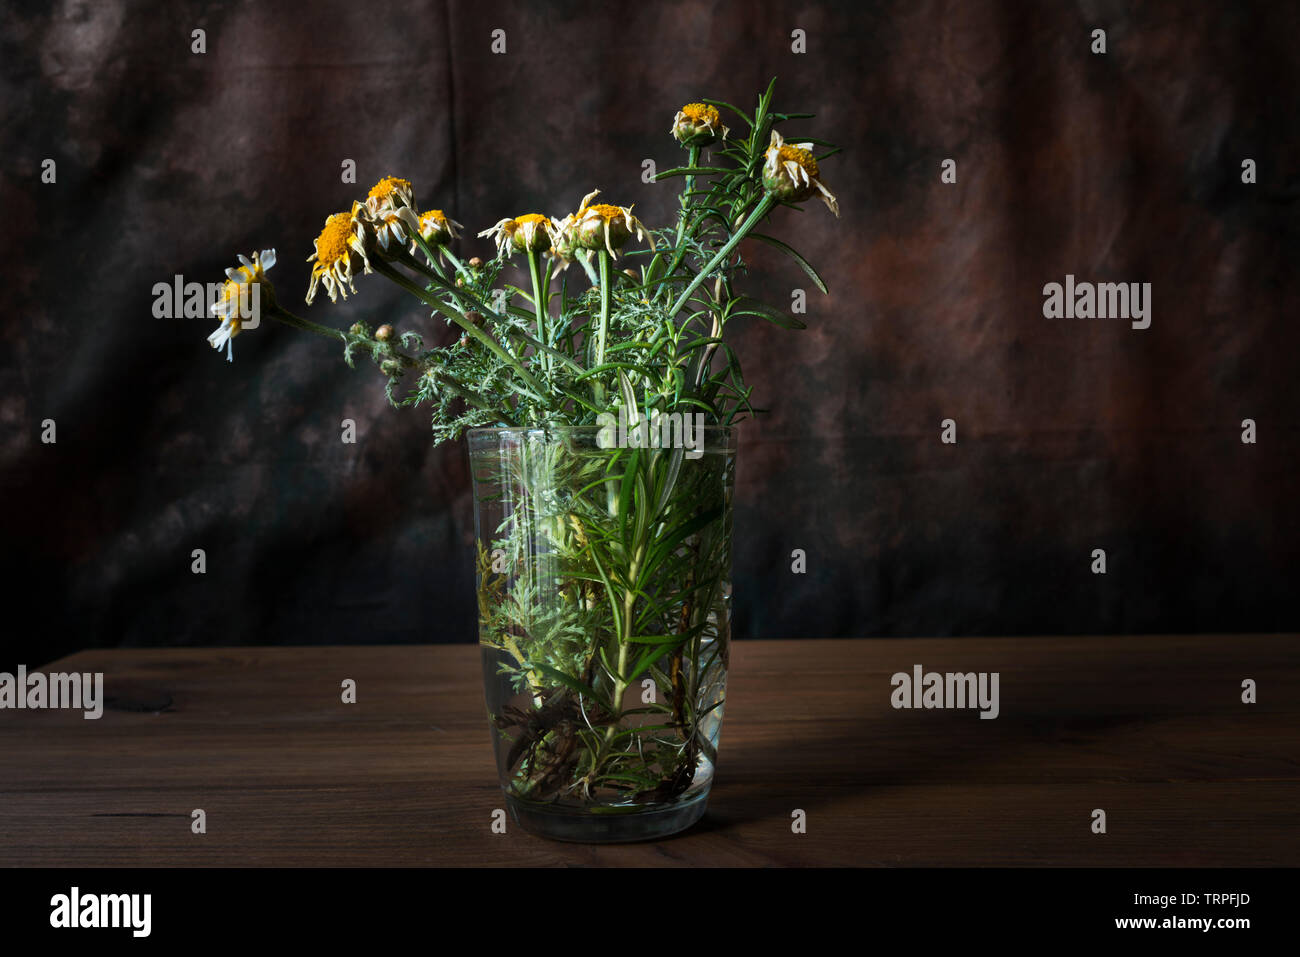 Concept of death. Still life with withered flowers in a glass with water on wooden table with dark background. Stock Photo